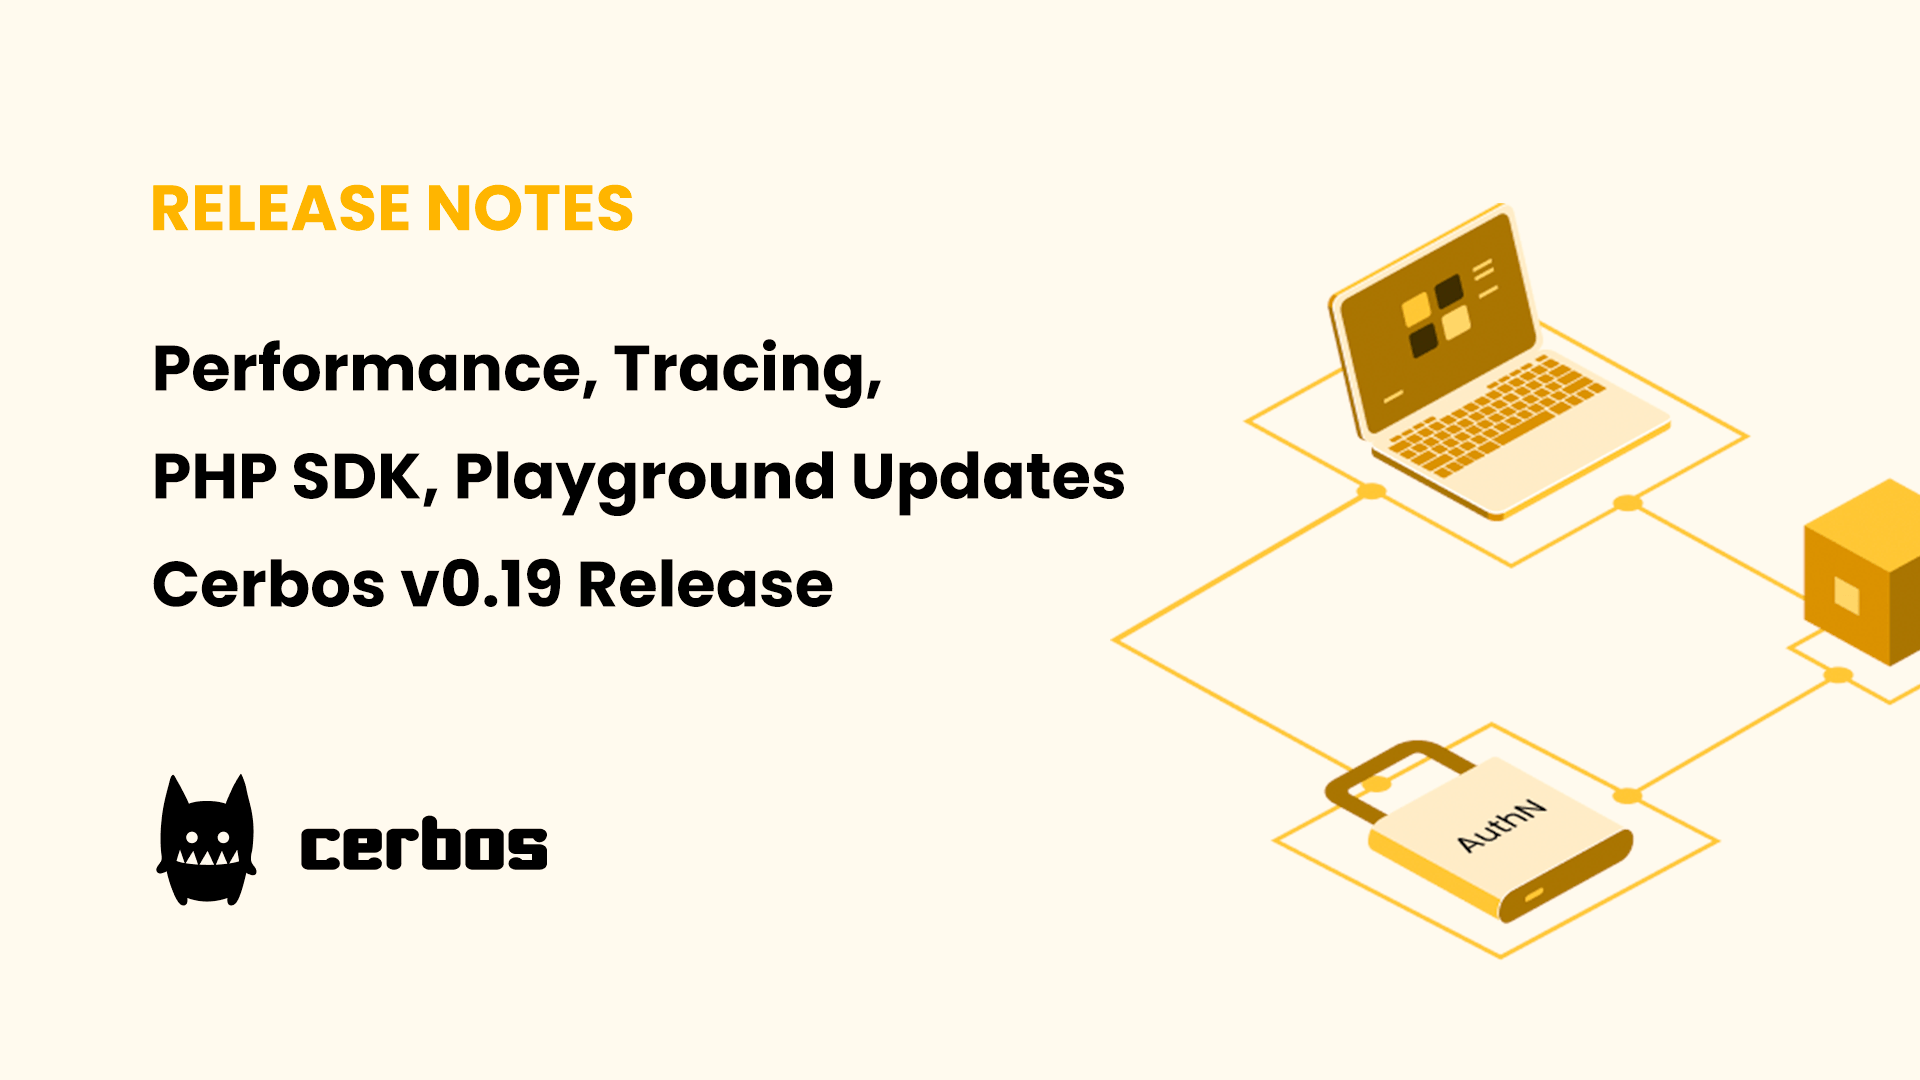 Performance, Tracing, PHP SDK, Playground Updates - Cerbos v0.19 Release